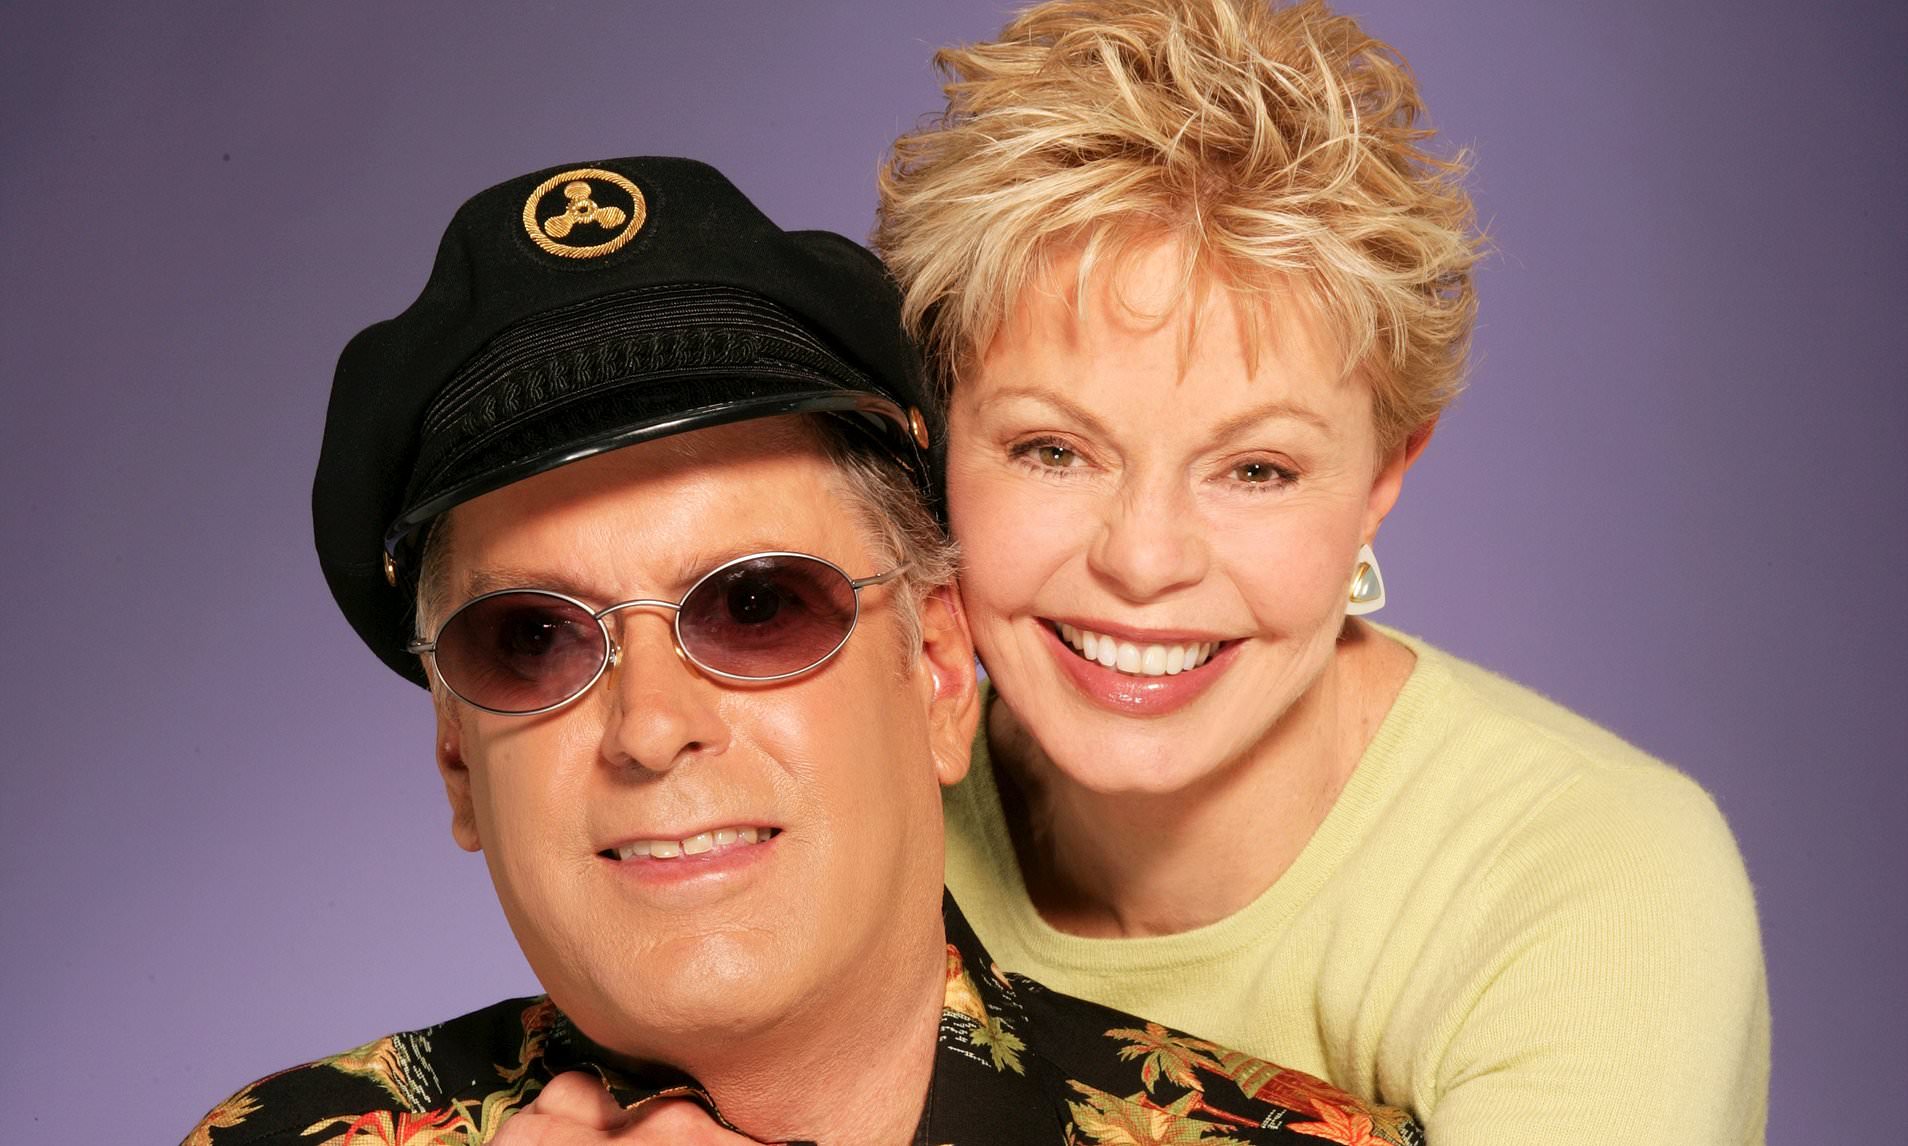 33-facts-about-the-captain-and-tennille